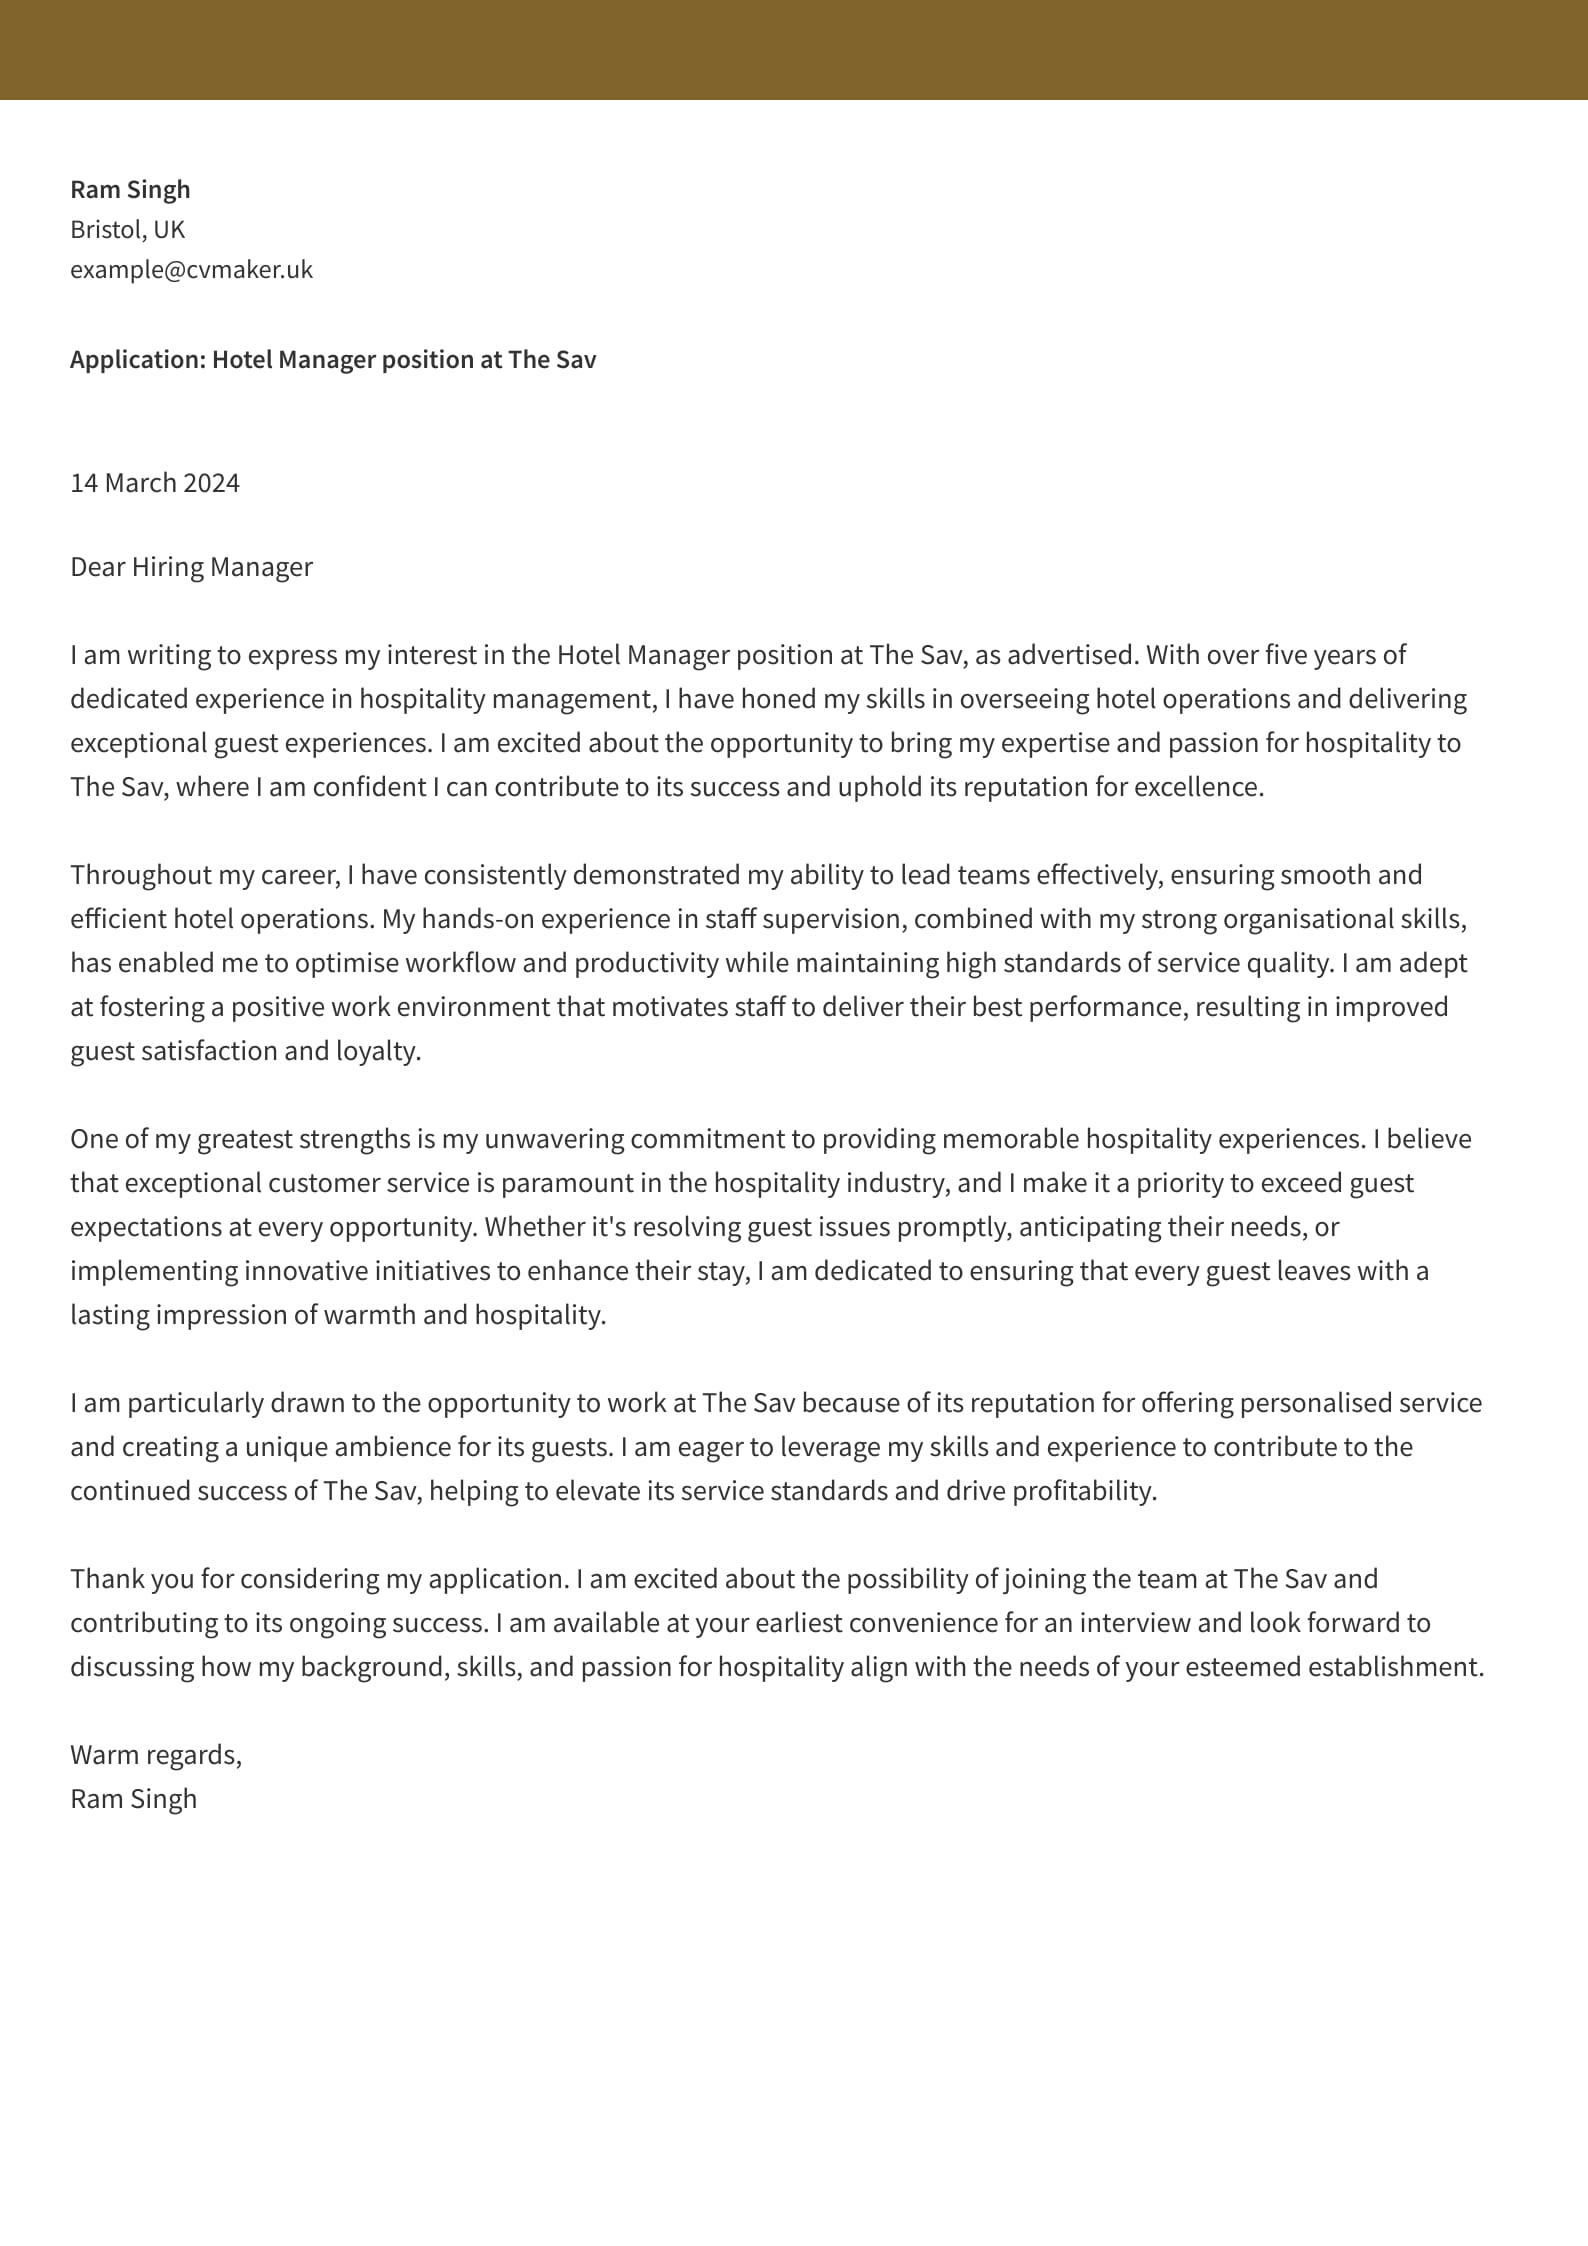 Cover Letter example - Hospitality - Cambridge template